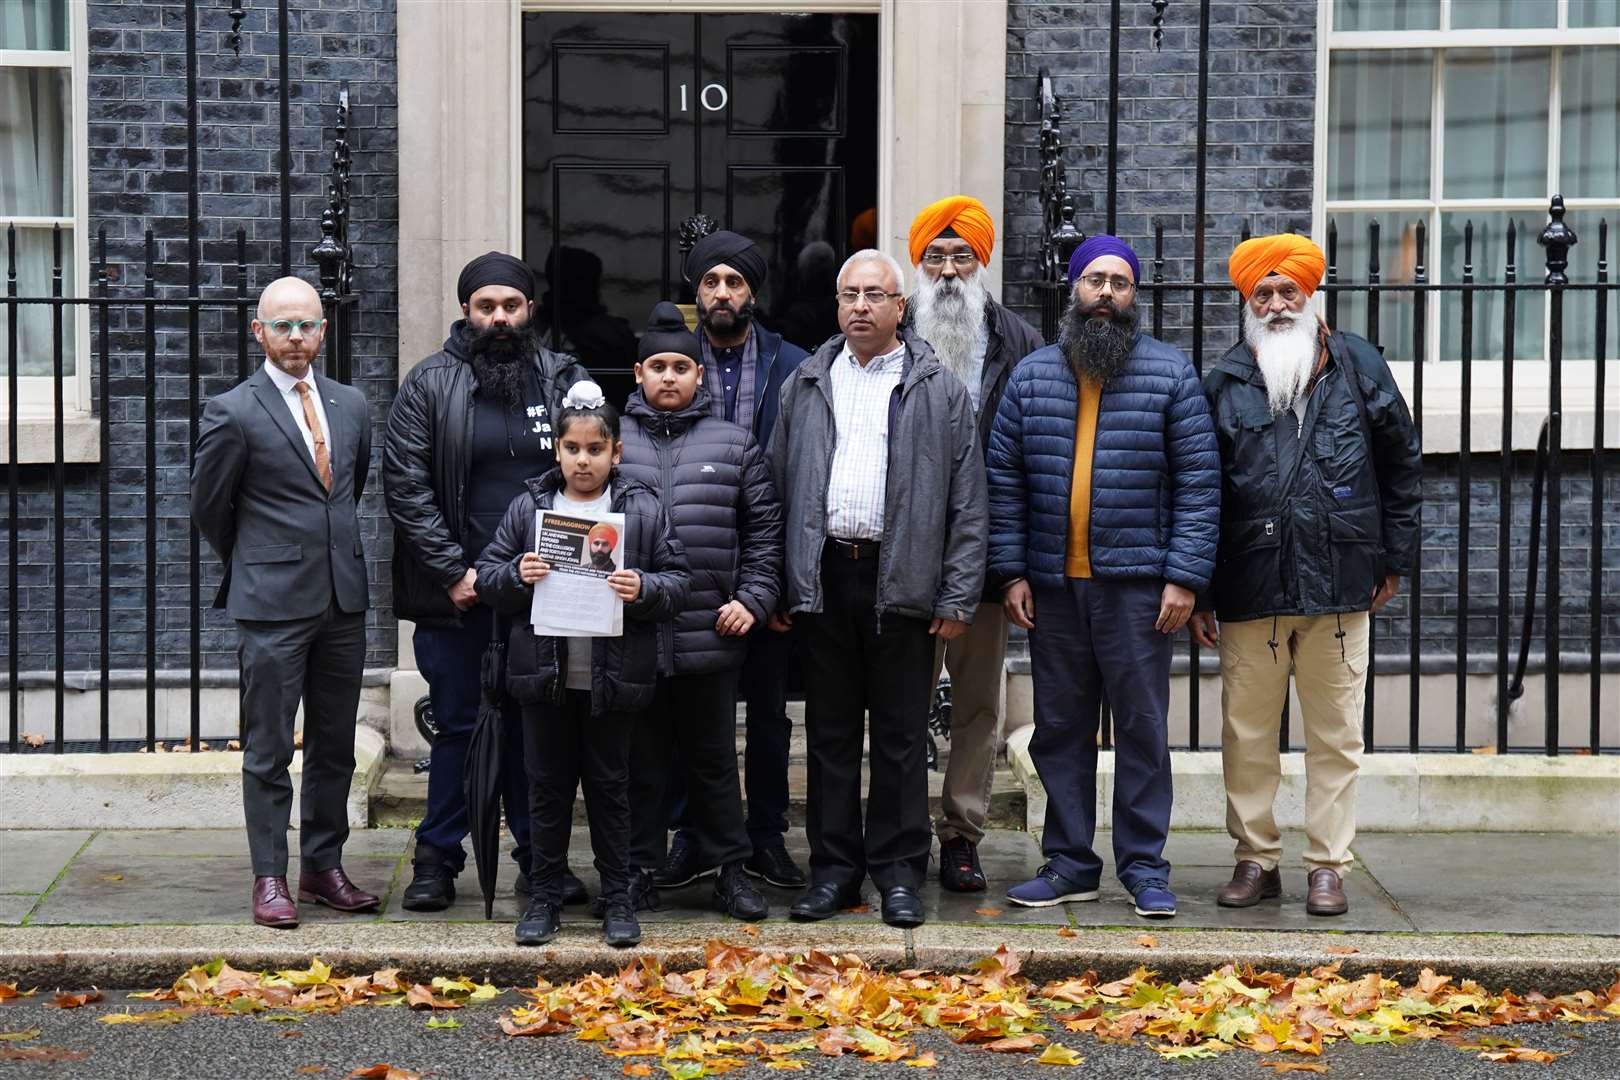 Supporters of Jagtar Singh Johal have been lobbying the British Government to act over his case (James Manning/PA)